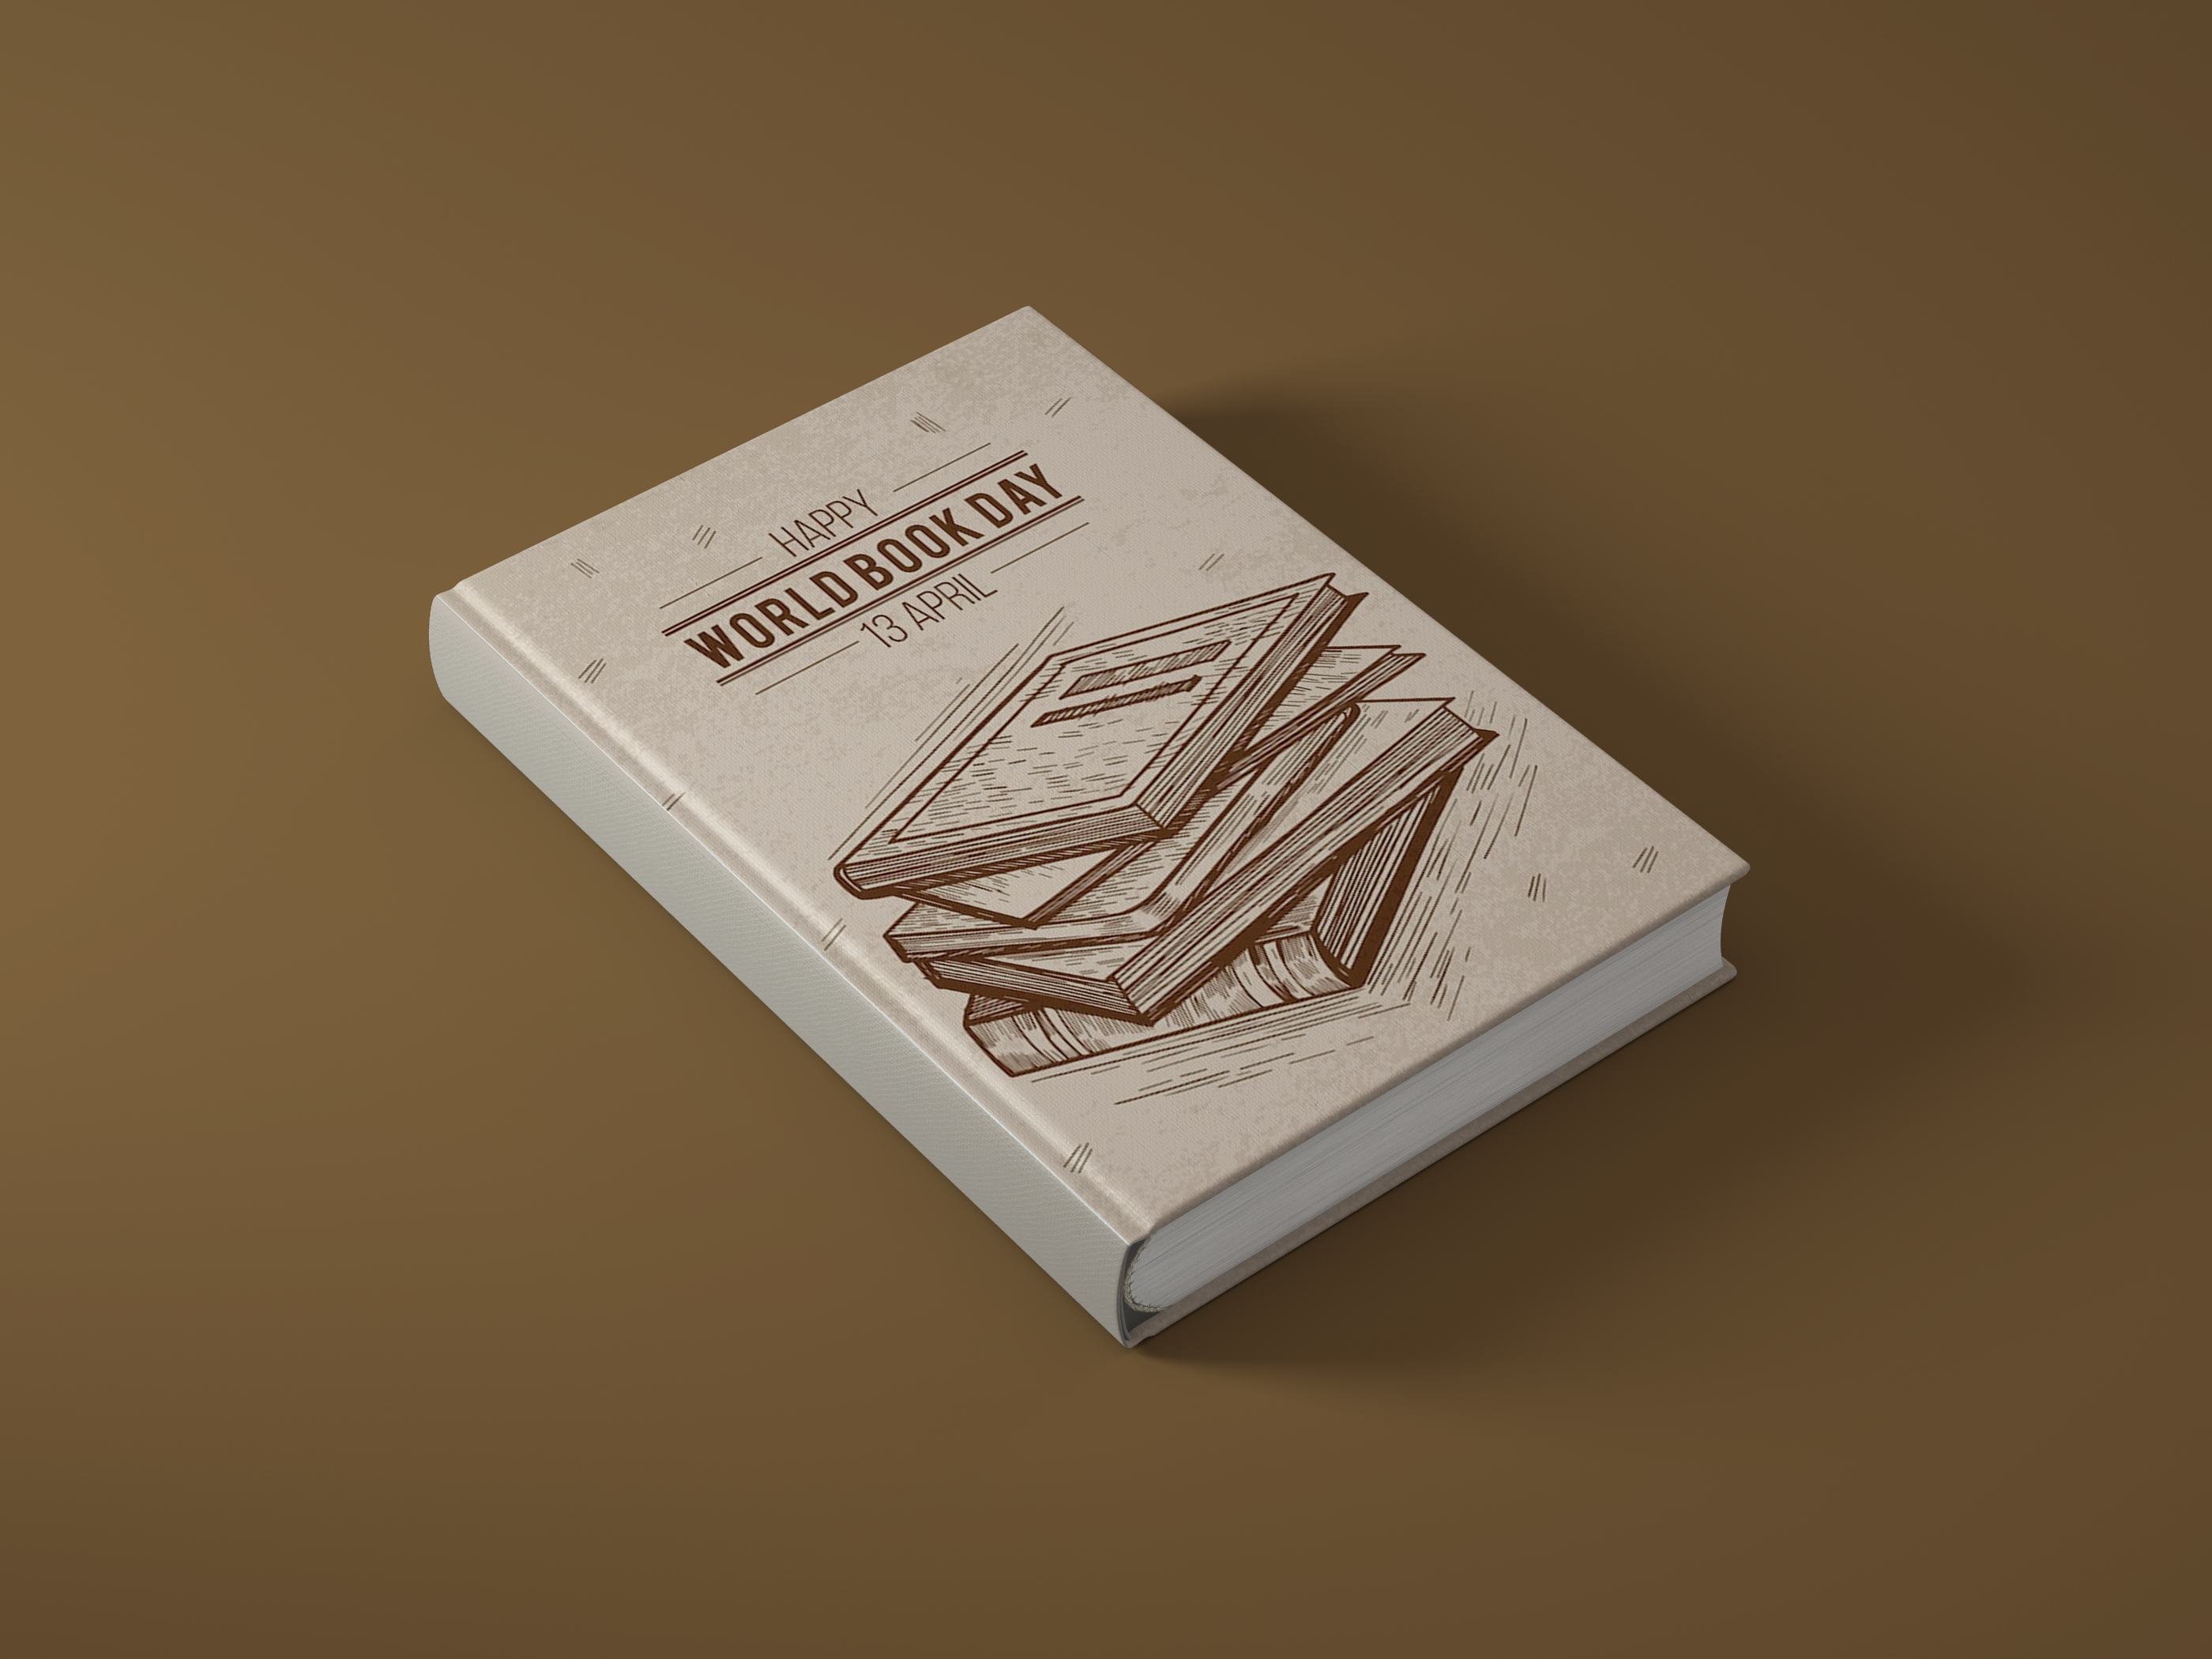 Sideview-Book-PSD-Mockup ffee download